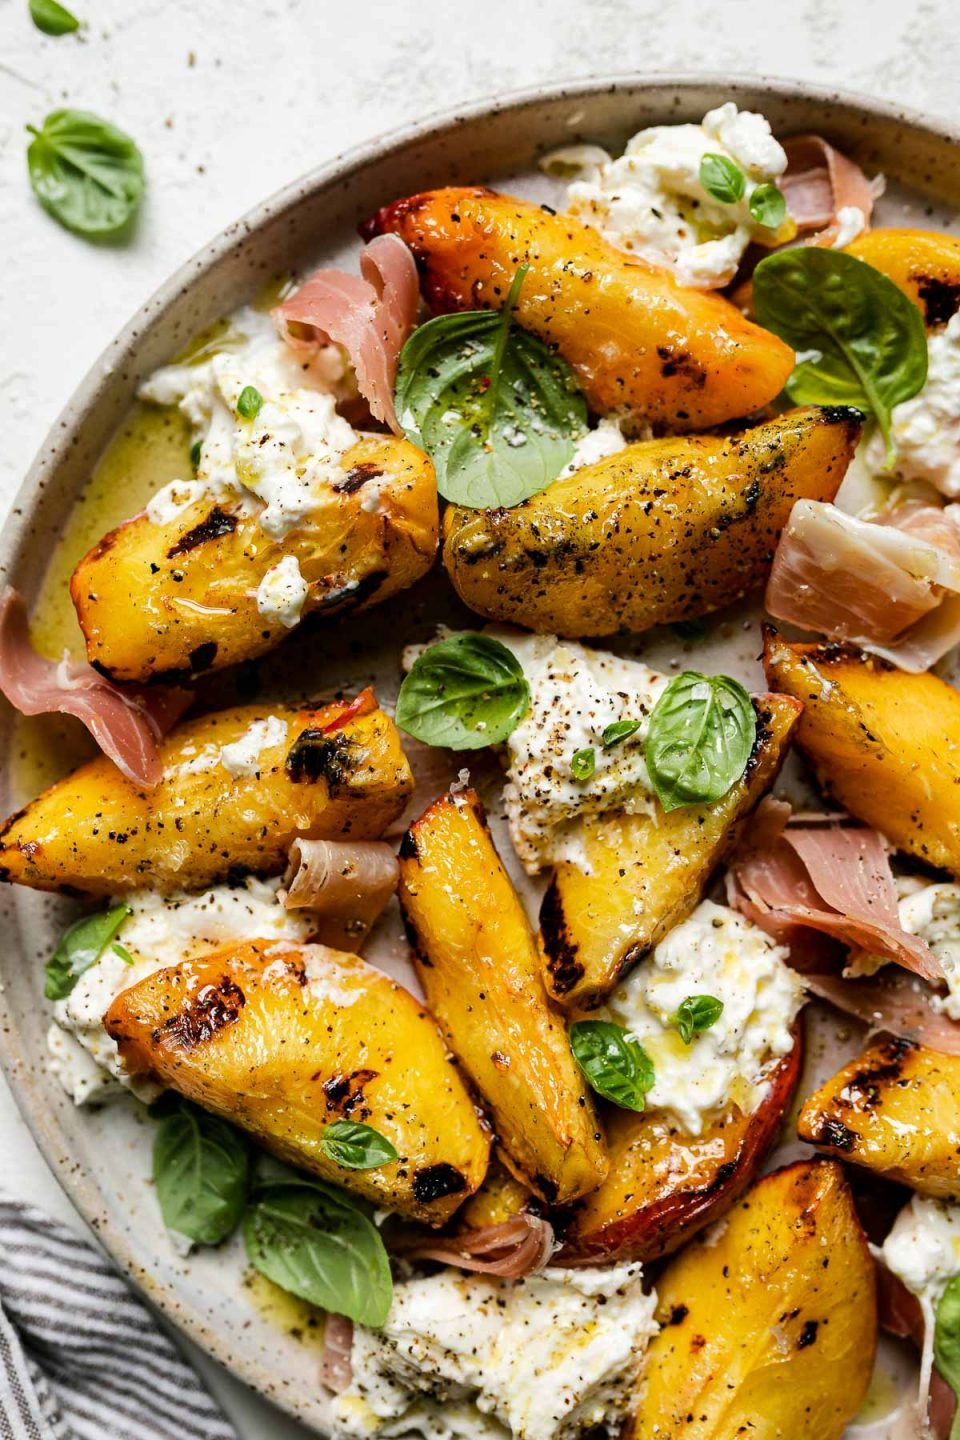 Grilled peaches, burrata cheese, fresh basil, & thinly sliced prosciutto arranged on a ceramic plate atop a textured white surface. Surrounding the grilled peach salad are fresh basil leaves & a gray striped linen napkin